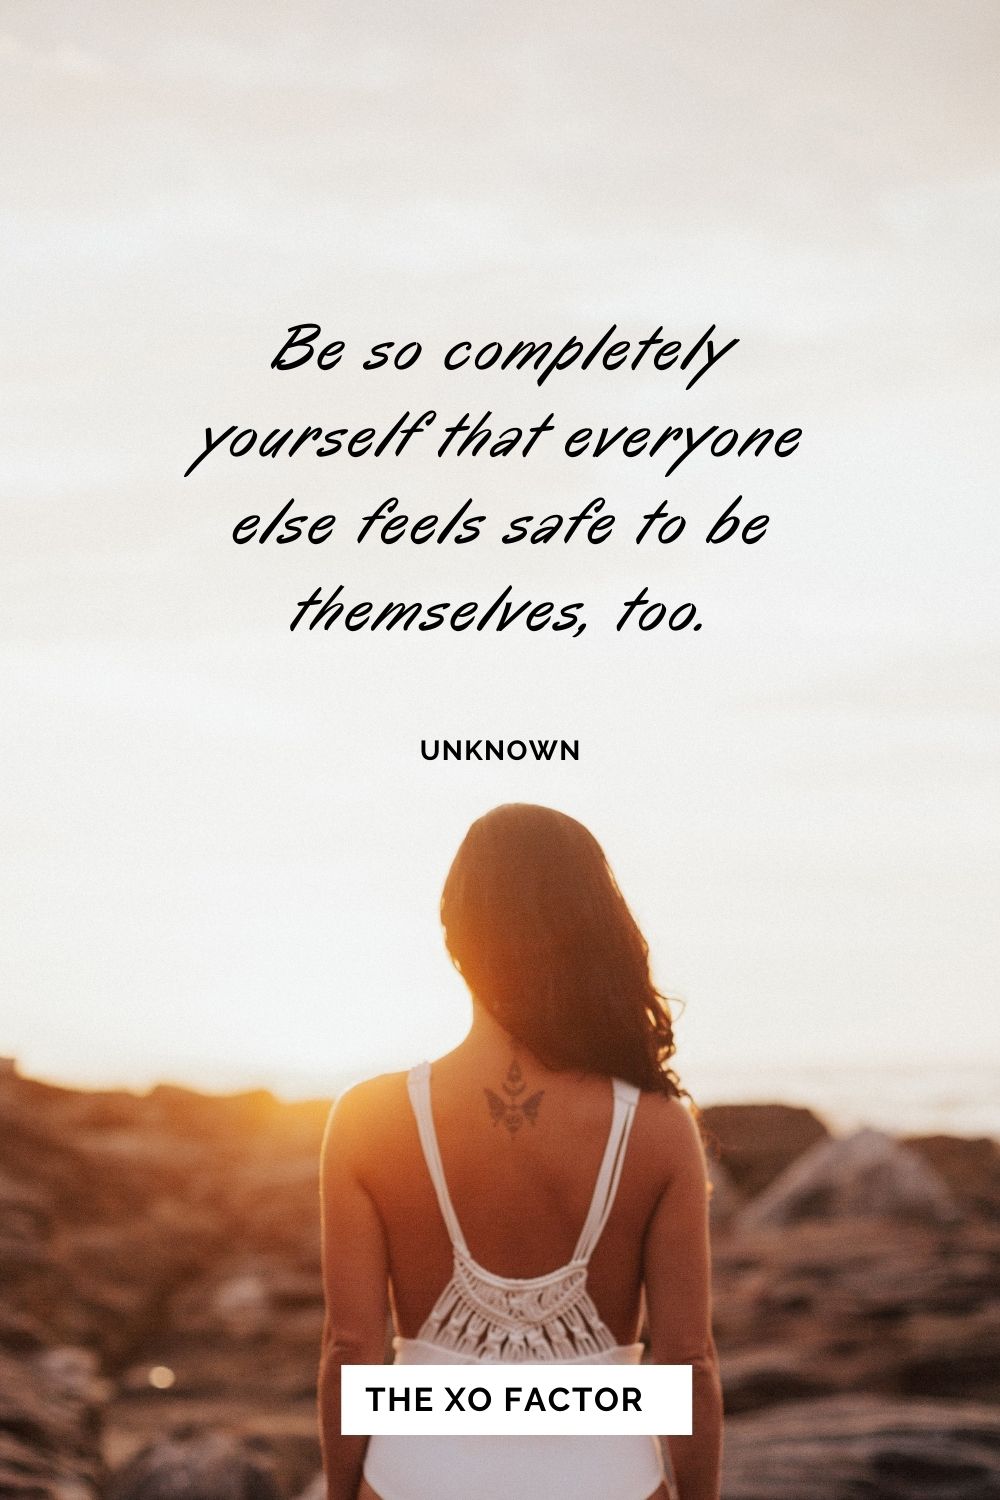 Be so completely yourself that everyone else feels safe to be themselves, too. Unknown